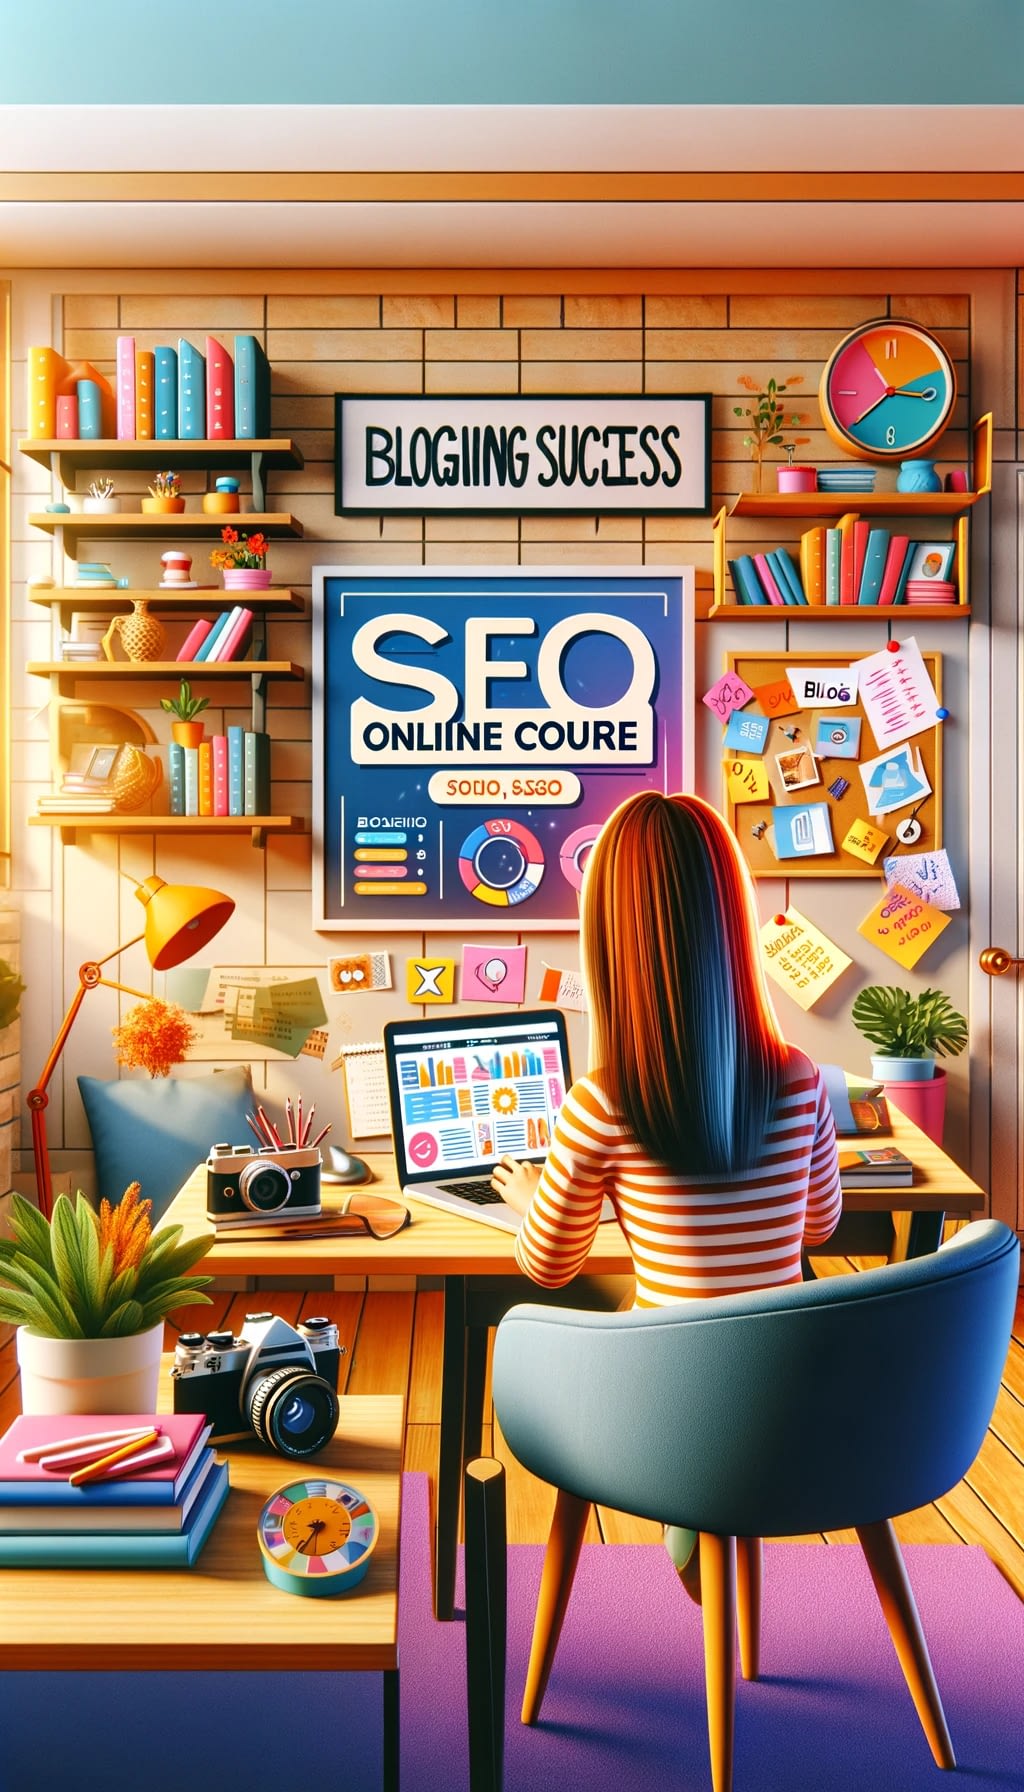 1000 Px By 1500 Px Image Of Successful Use Of Easy To Understand And Usse Seo Online Course -